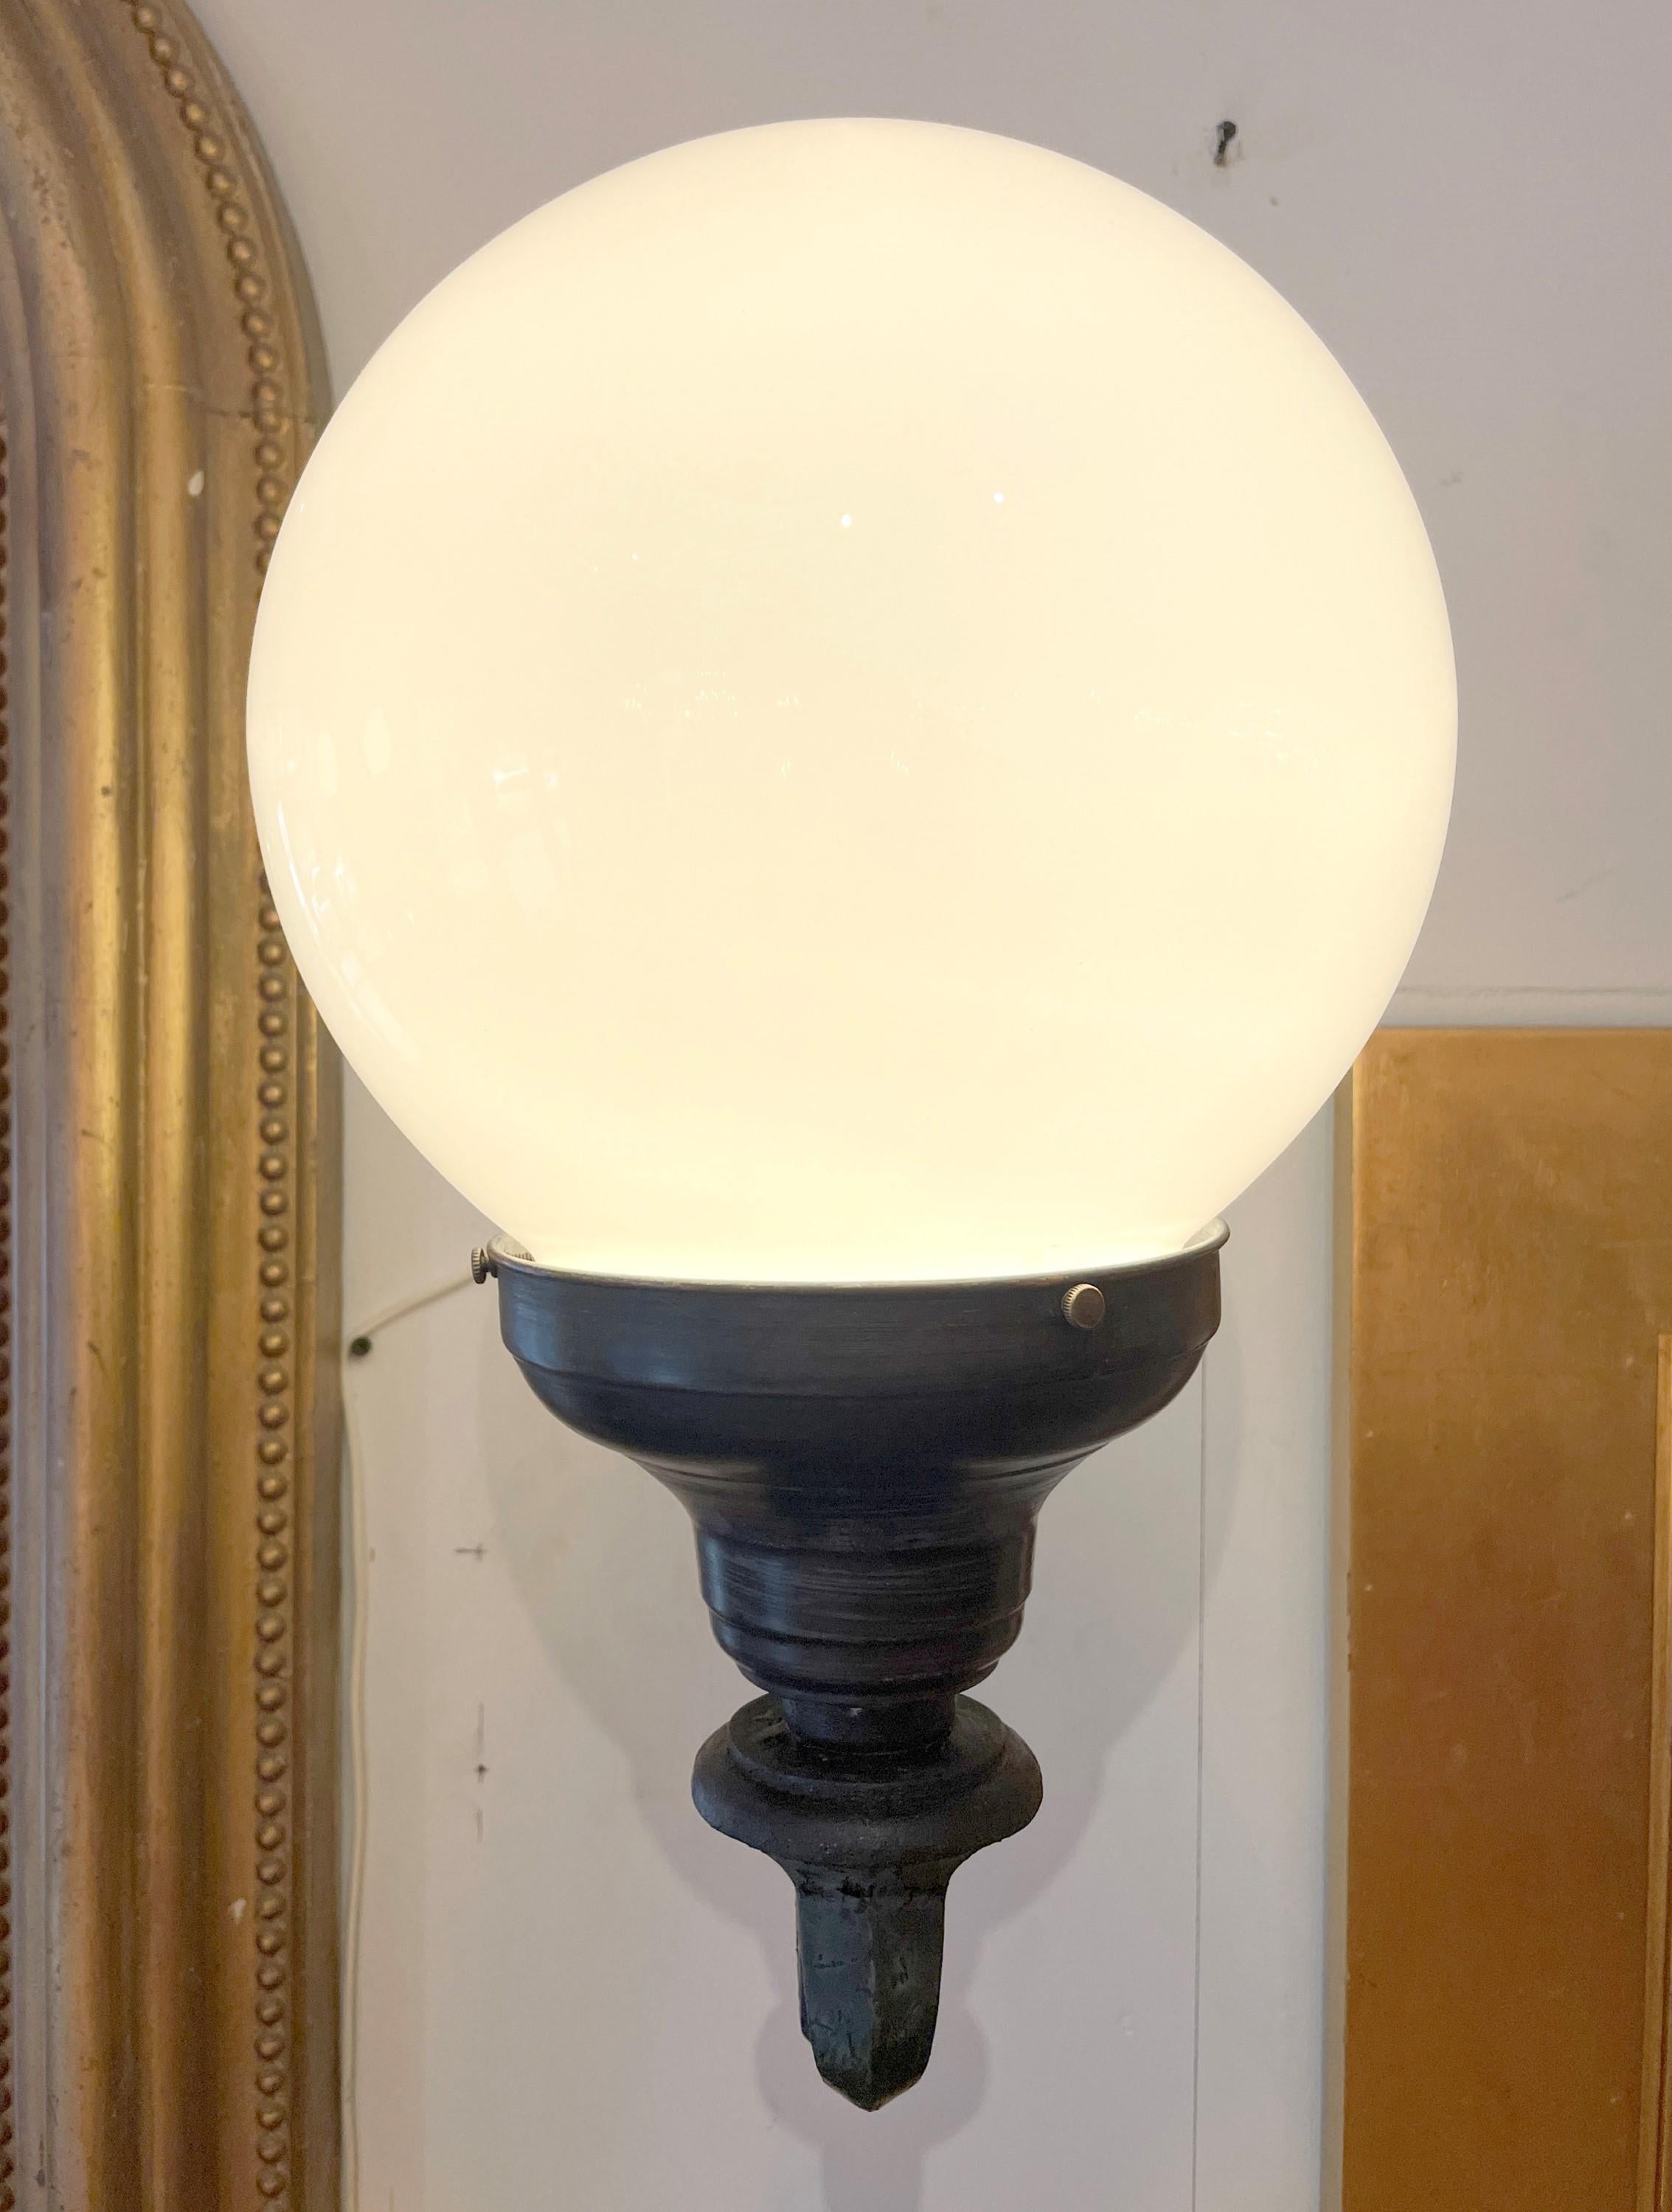 Early 20th century pair of exterior building sconces. Made with a cast iron body and brass shade holders. These also feature white ball globe shades. Cleaned and restored. Priced as a pair. Please note, this item is located in one of our NYC